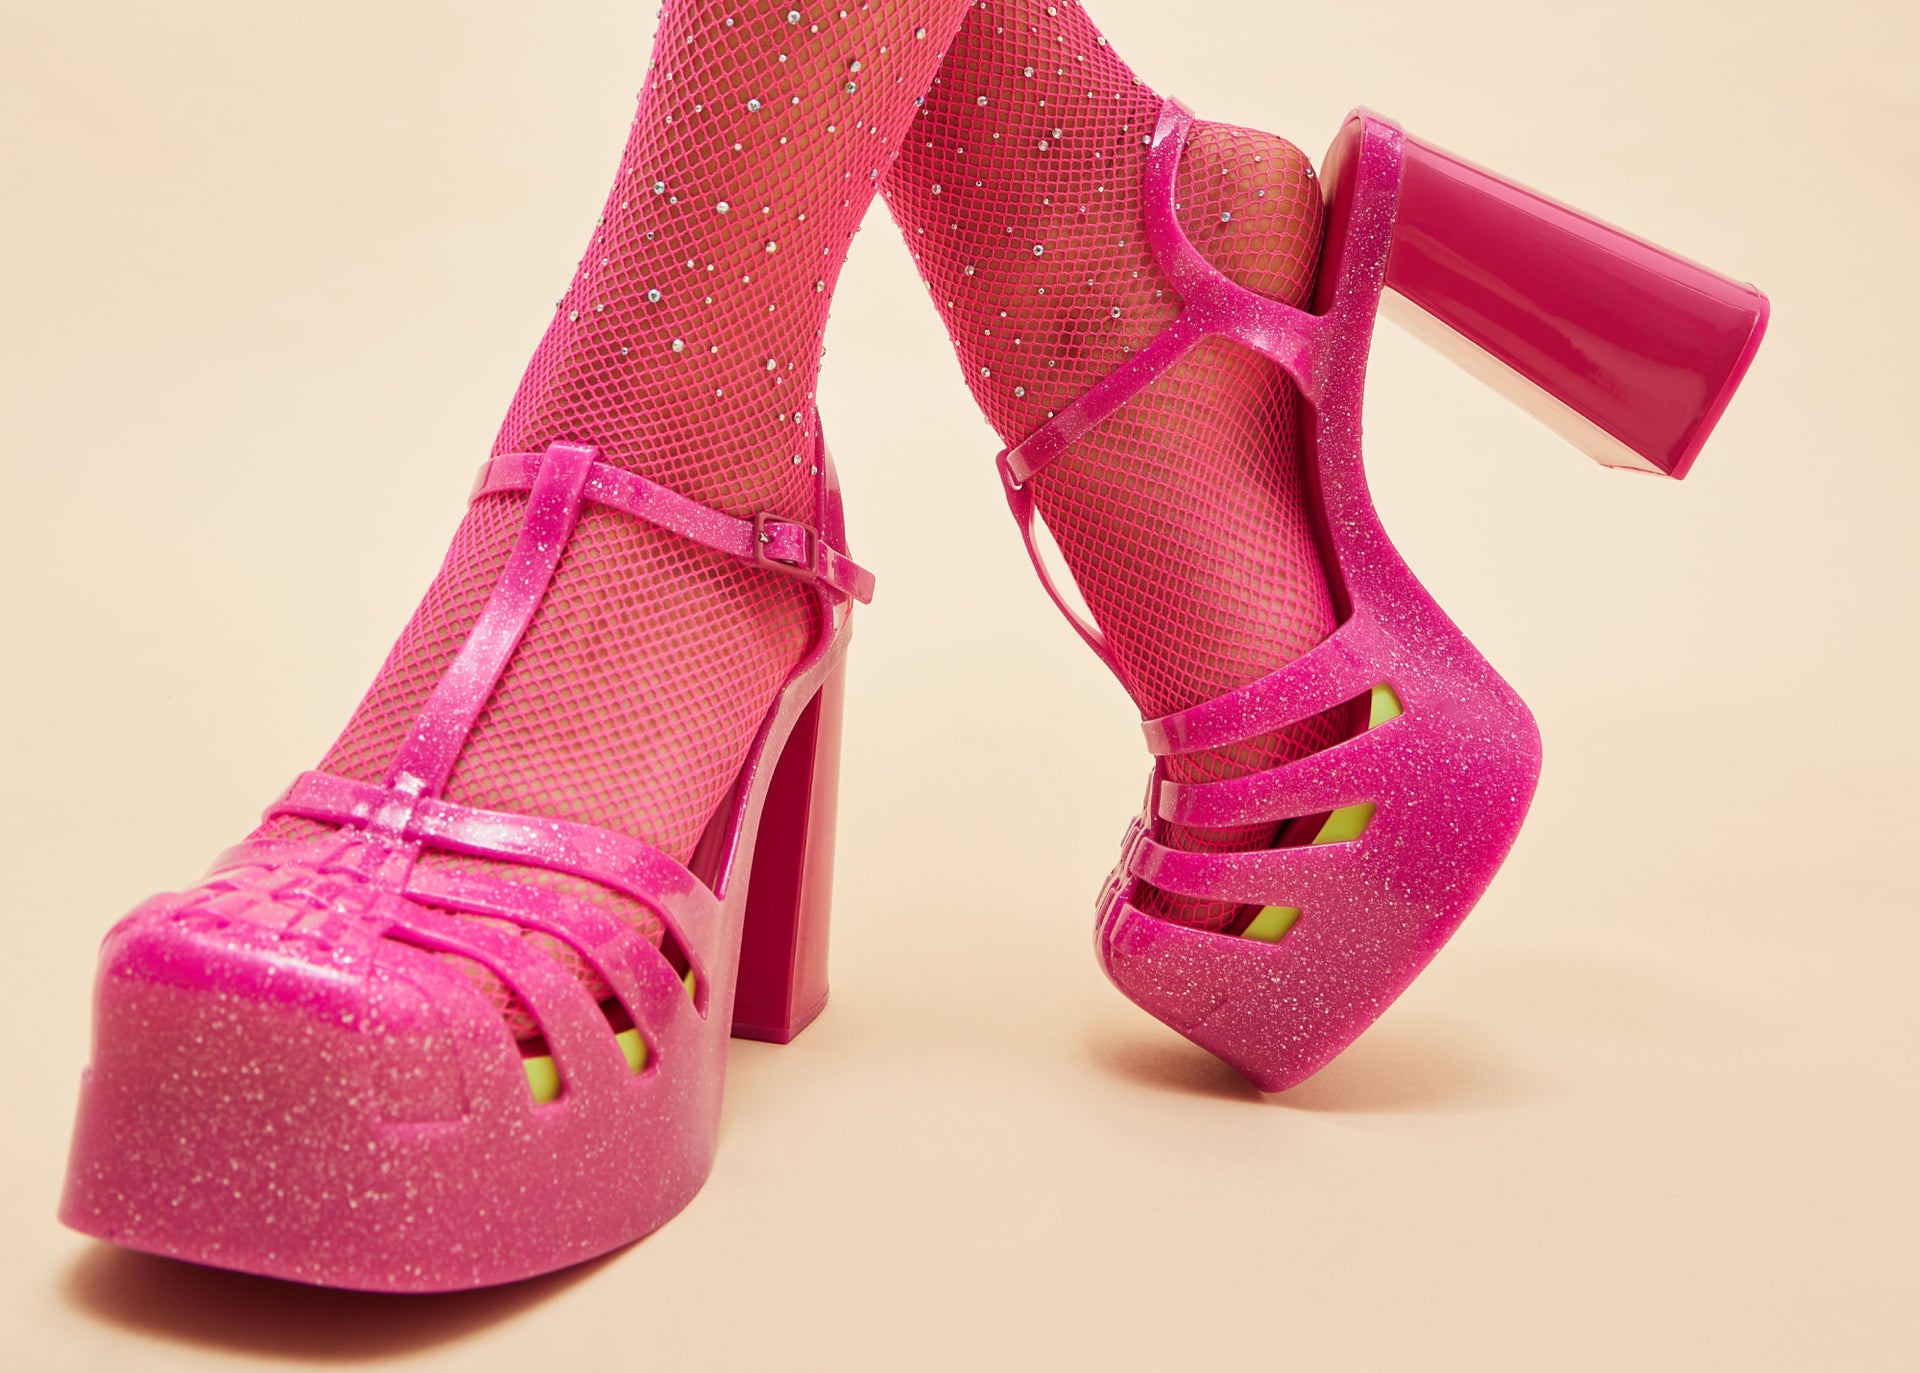 model wearing the pink party heel